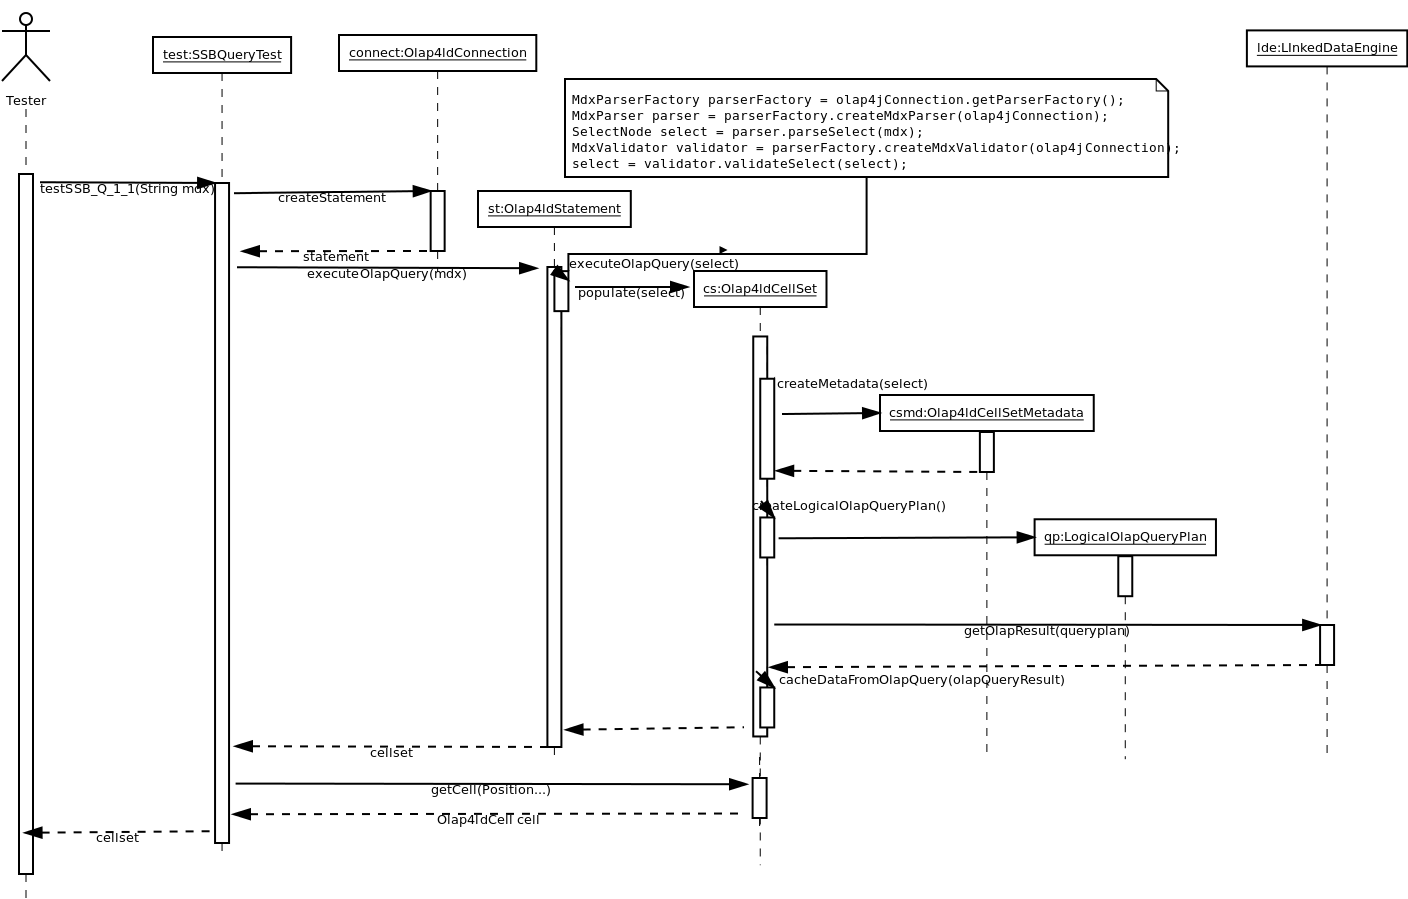 Olap4ld olap query sequence diagram.png